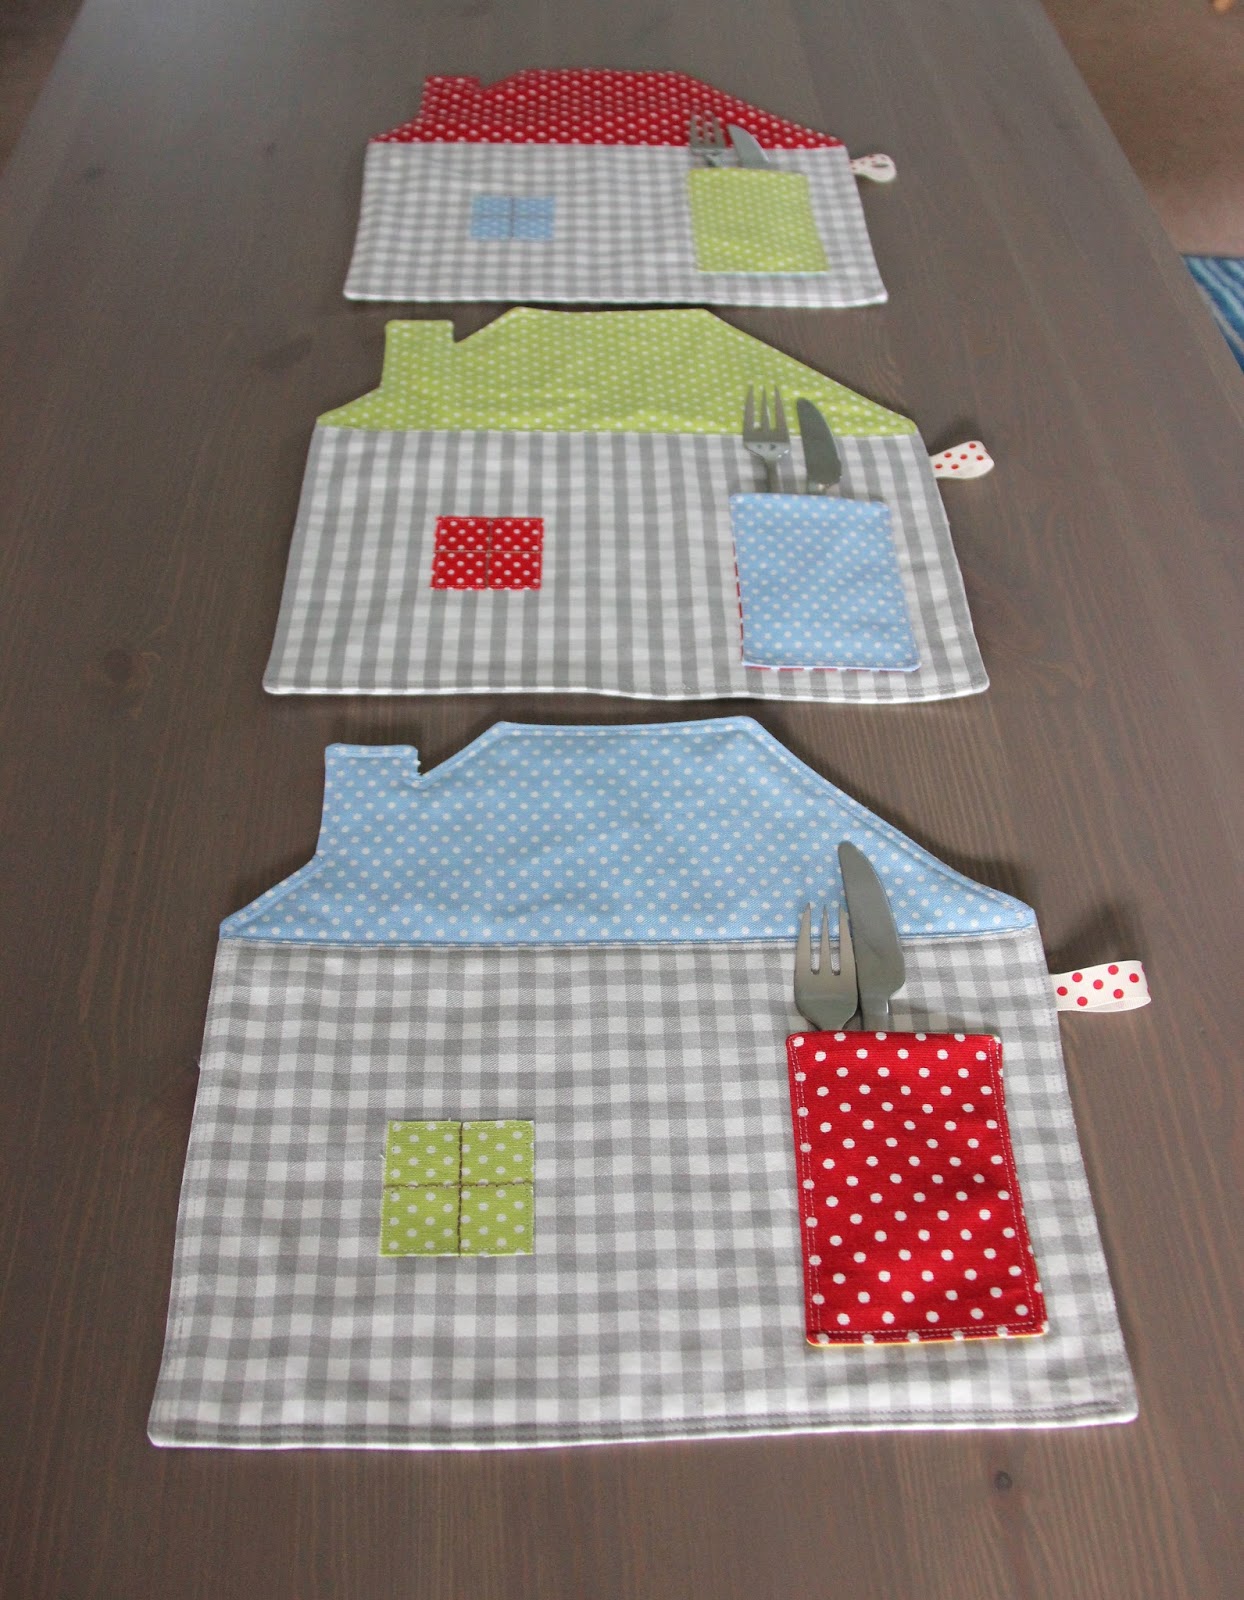 House placemats